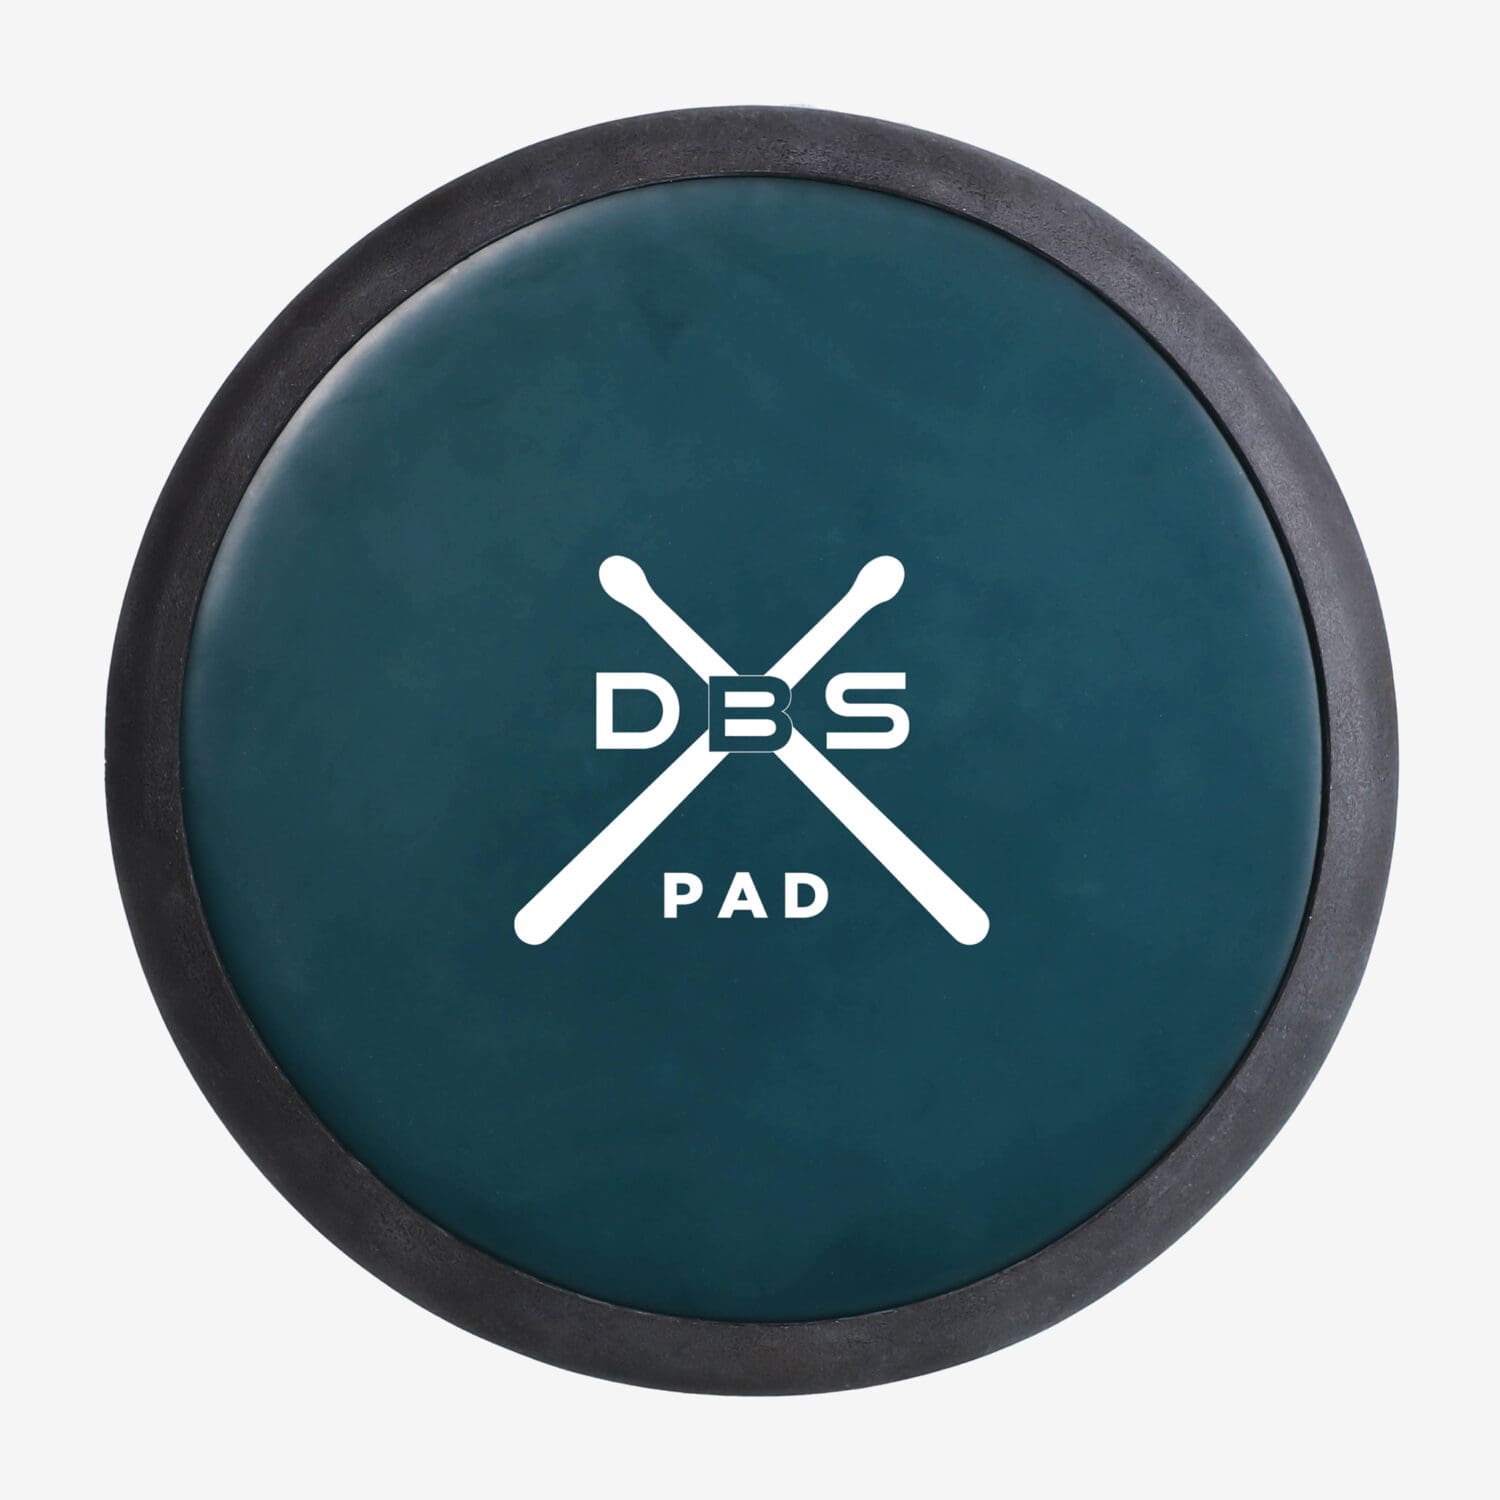 Double-Sided Moongel / Soft Rubber Practice Pad